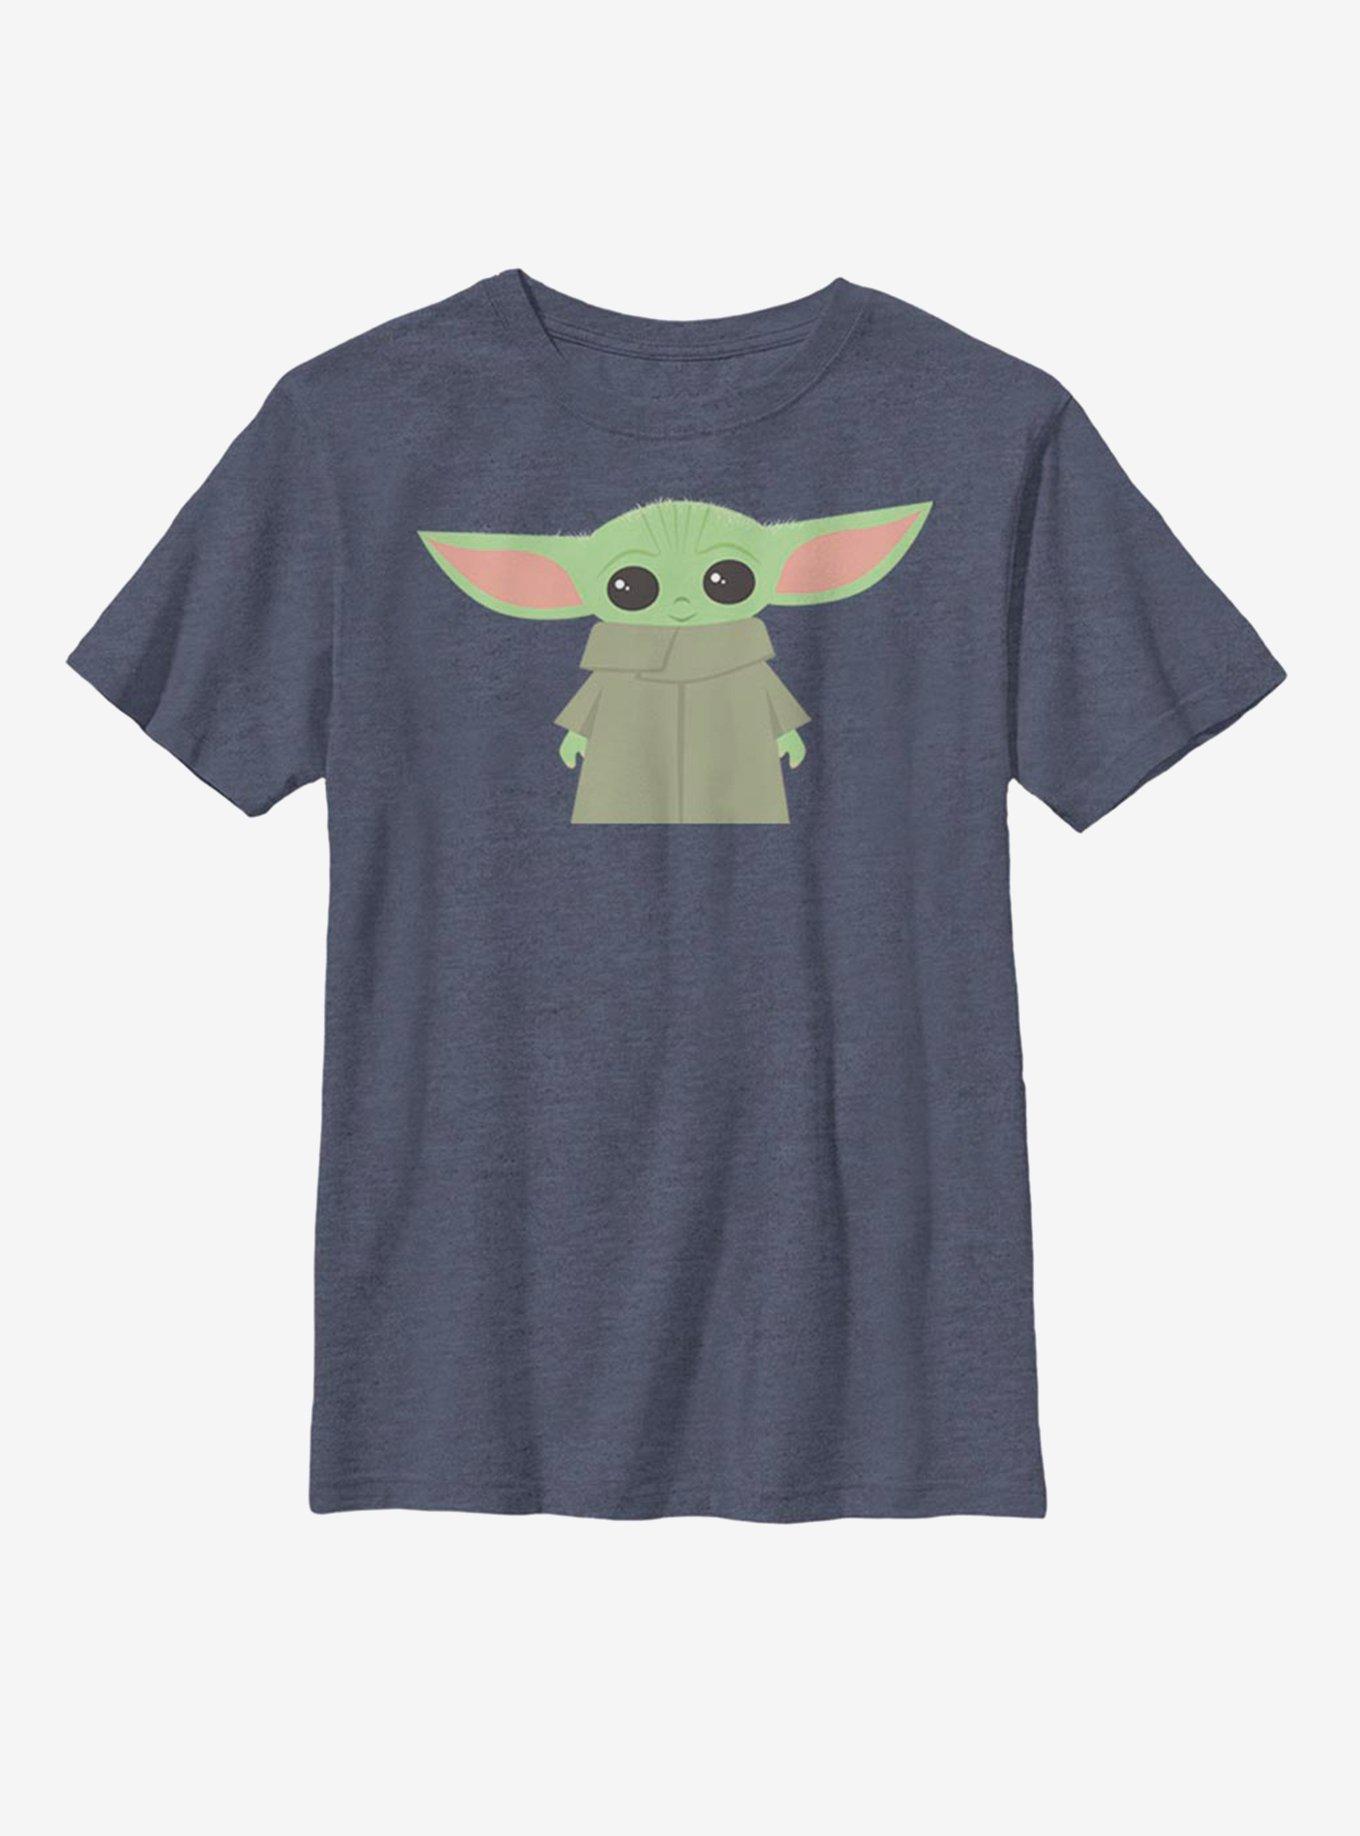 Star Wars The Mandalorian The Child Simple And Cute Youth T-Shirt, NAVY HTR, hi-res